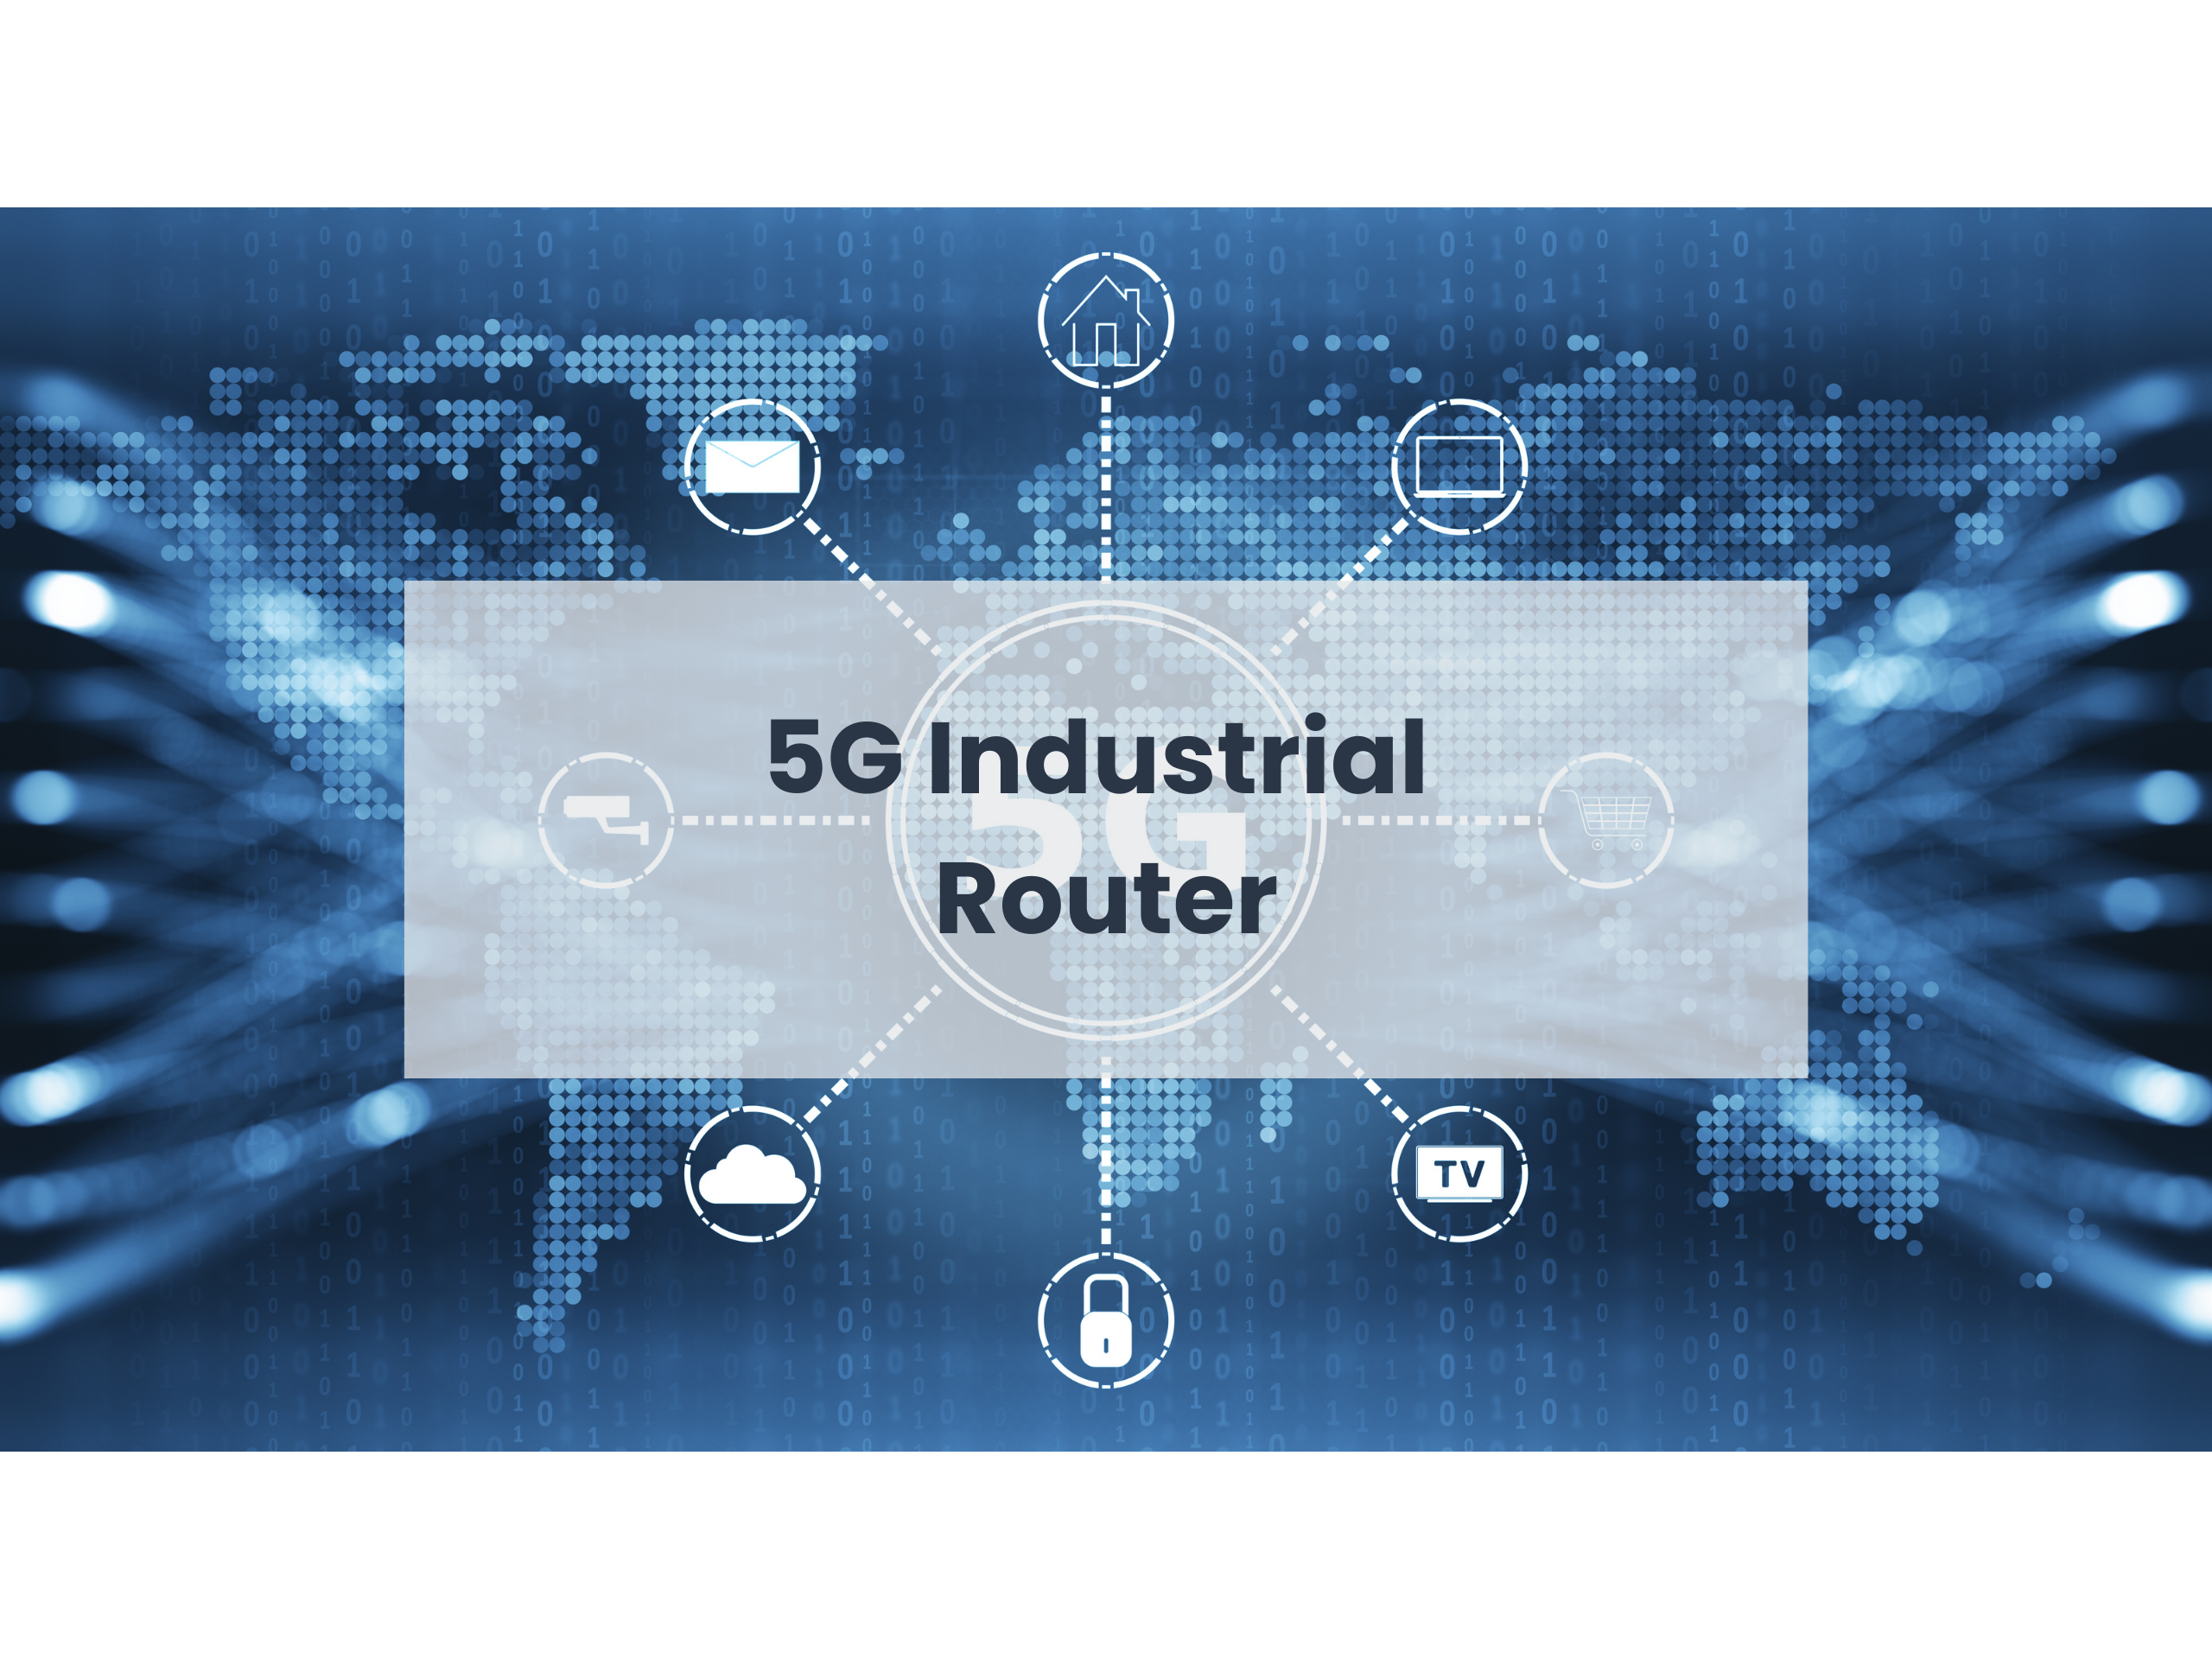 The Power of 5G; Next Generation Connection Experience